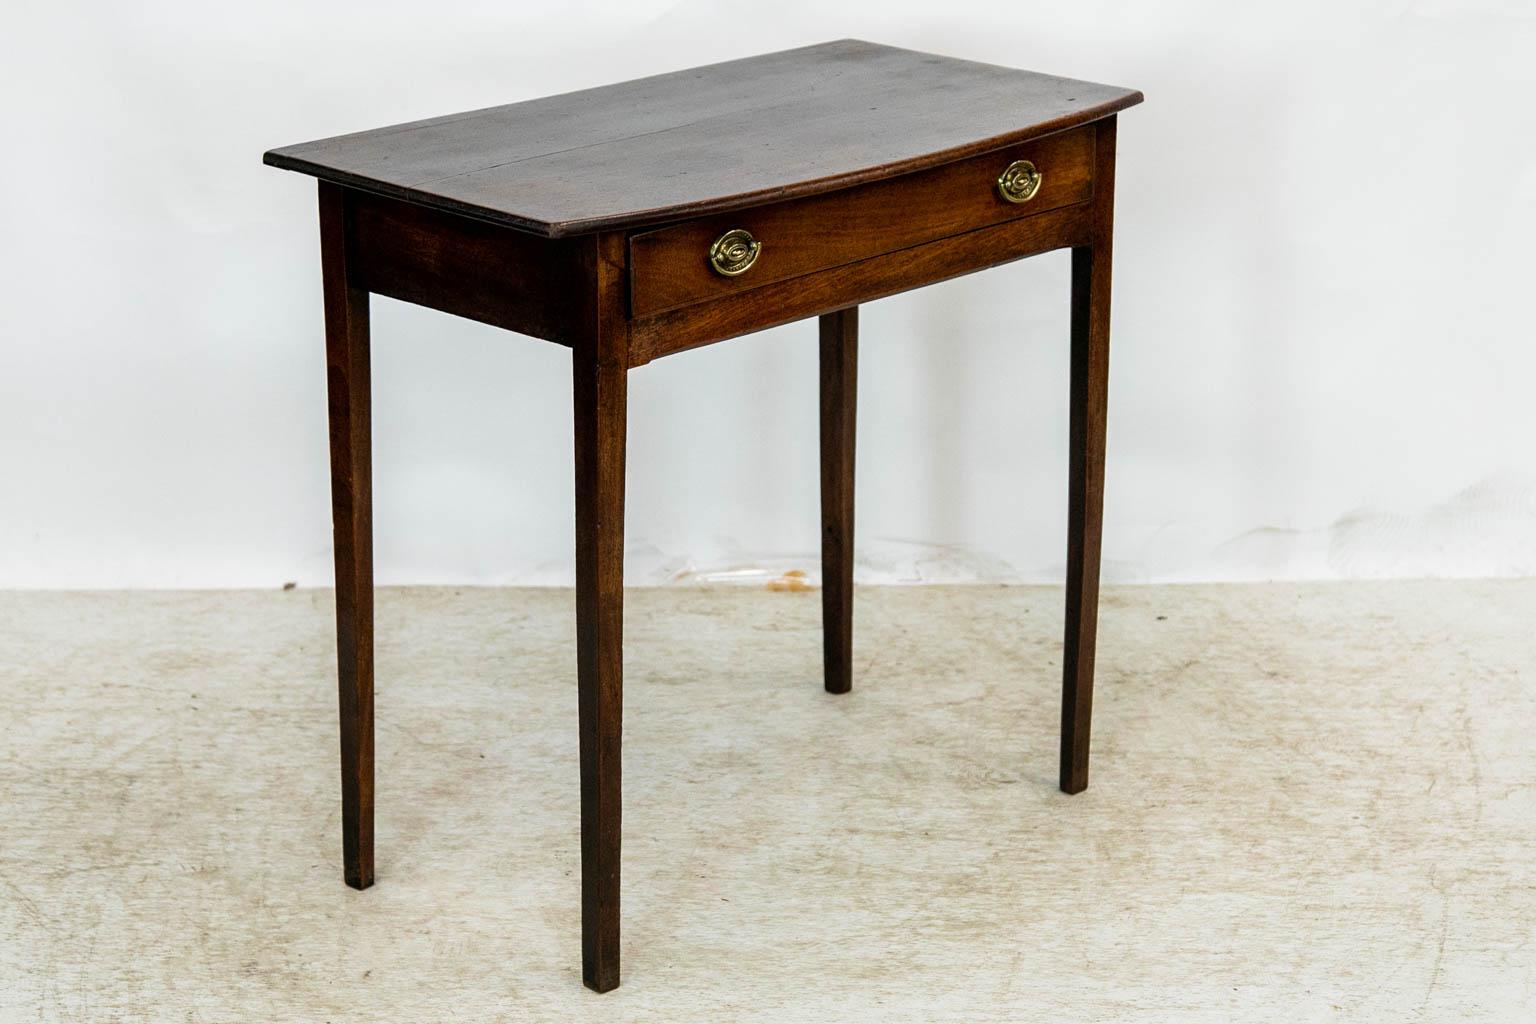 Late 18th Century Hepplewhite Bowfront Side Table